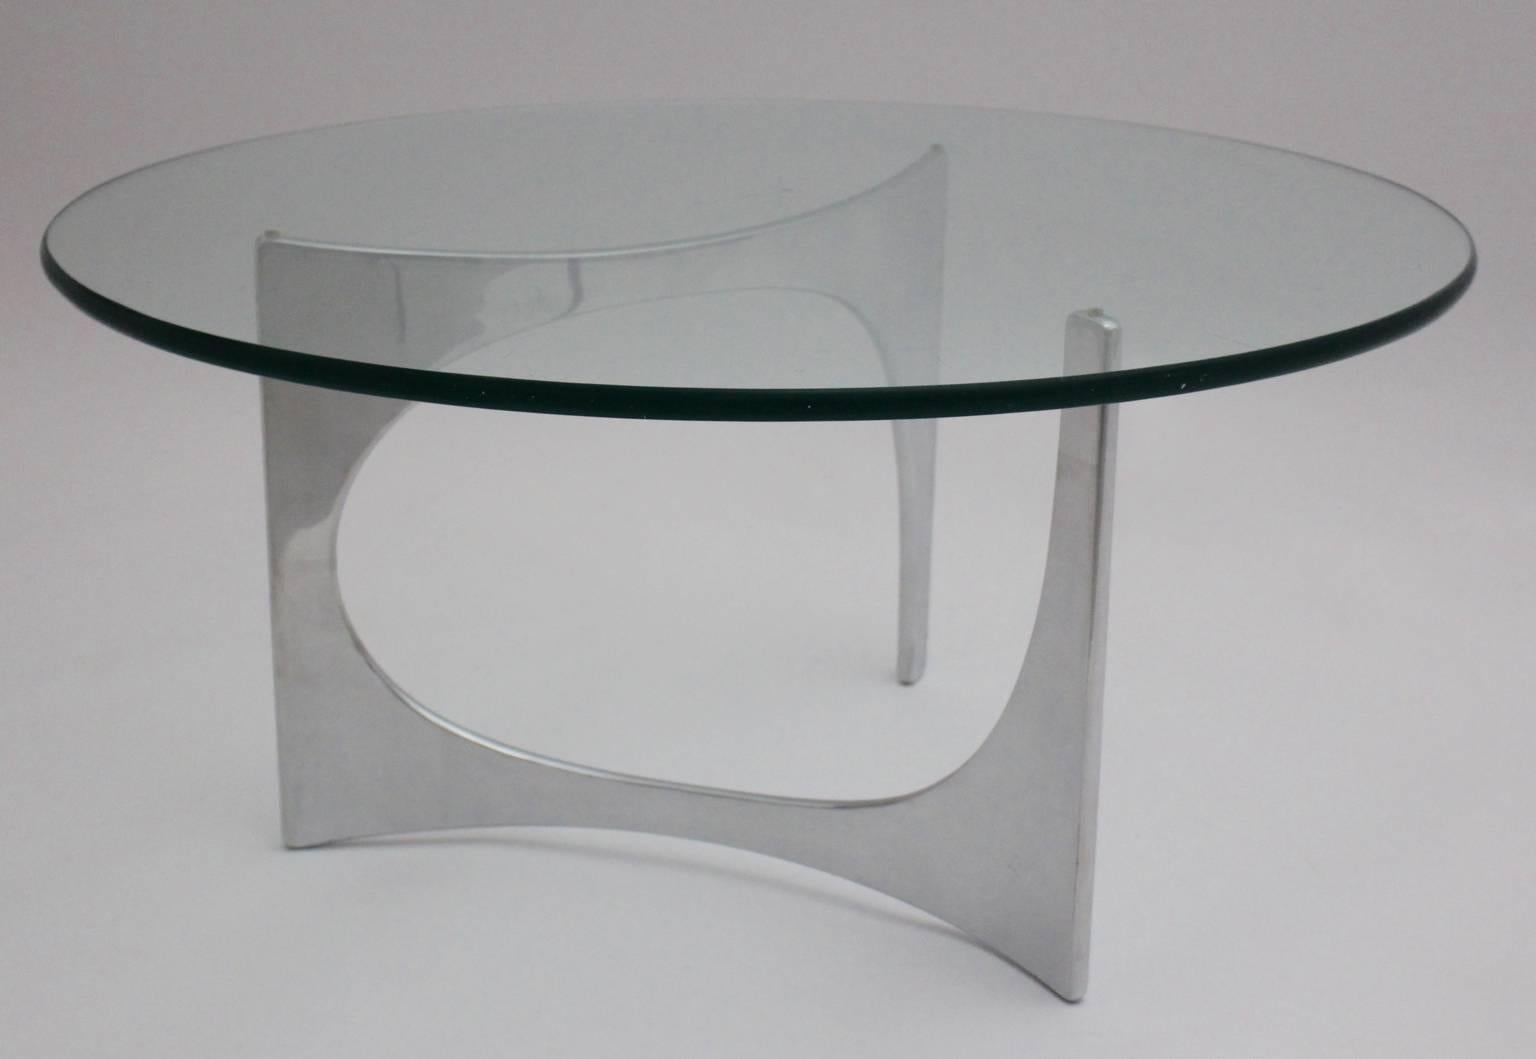 Cast Space Age Silver Aluminum Glass Vintage Coffee Table by Knut Hesterberg c 1970 For Sale